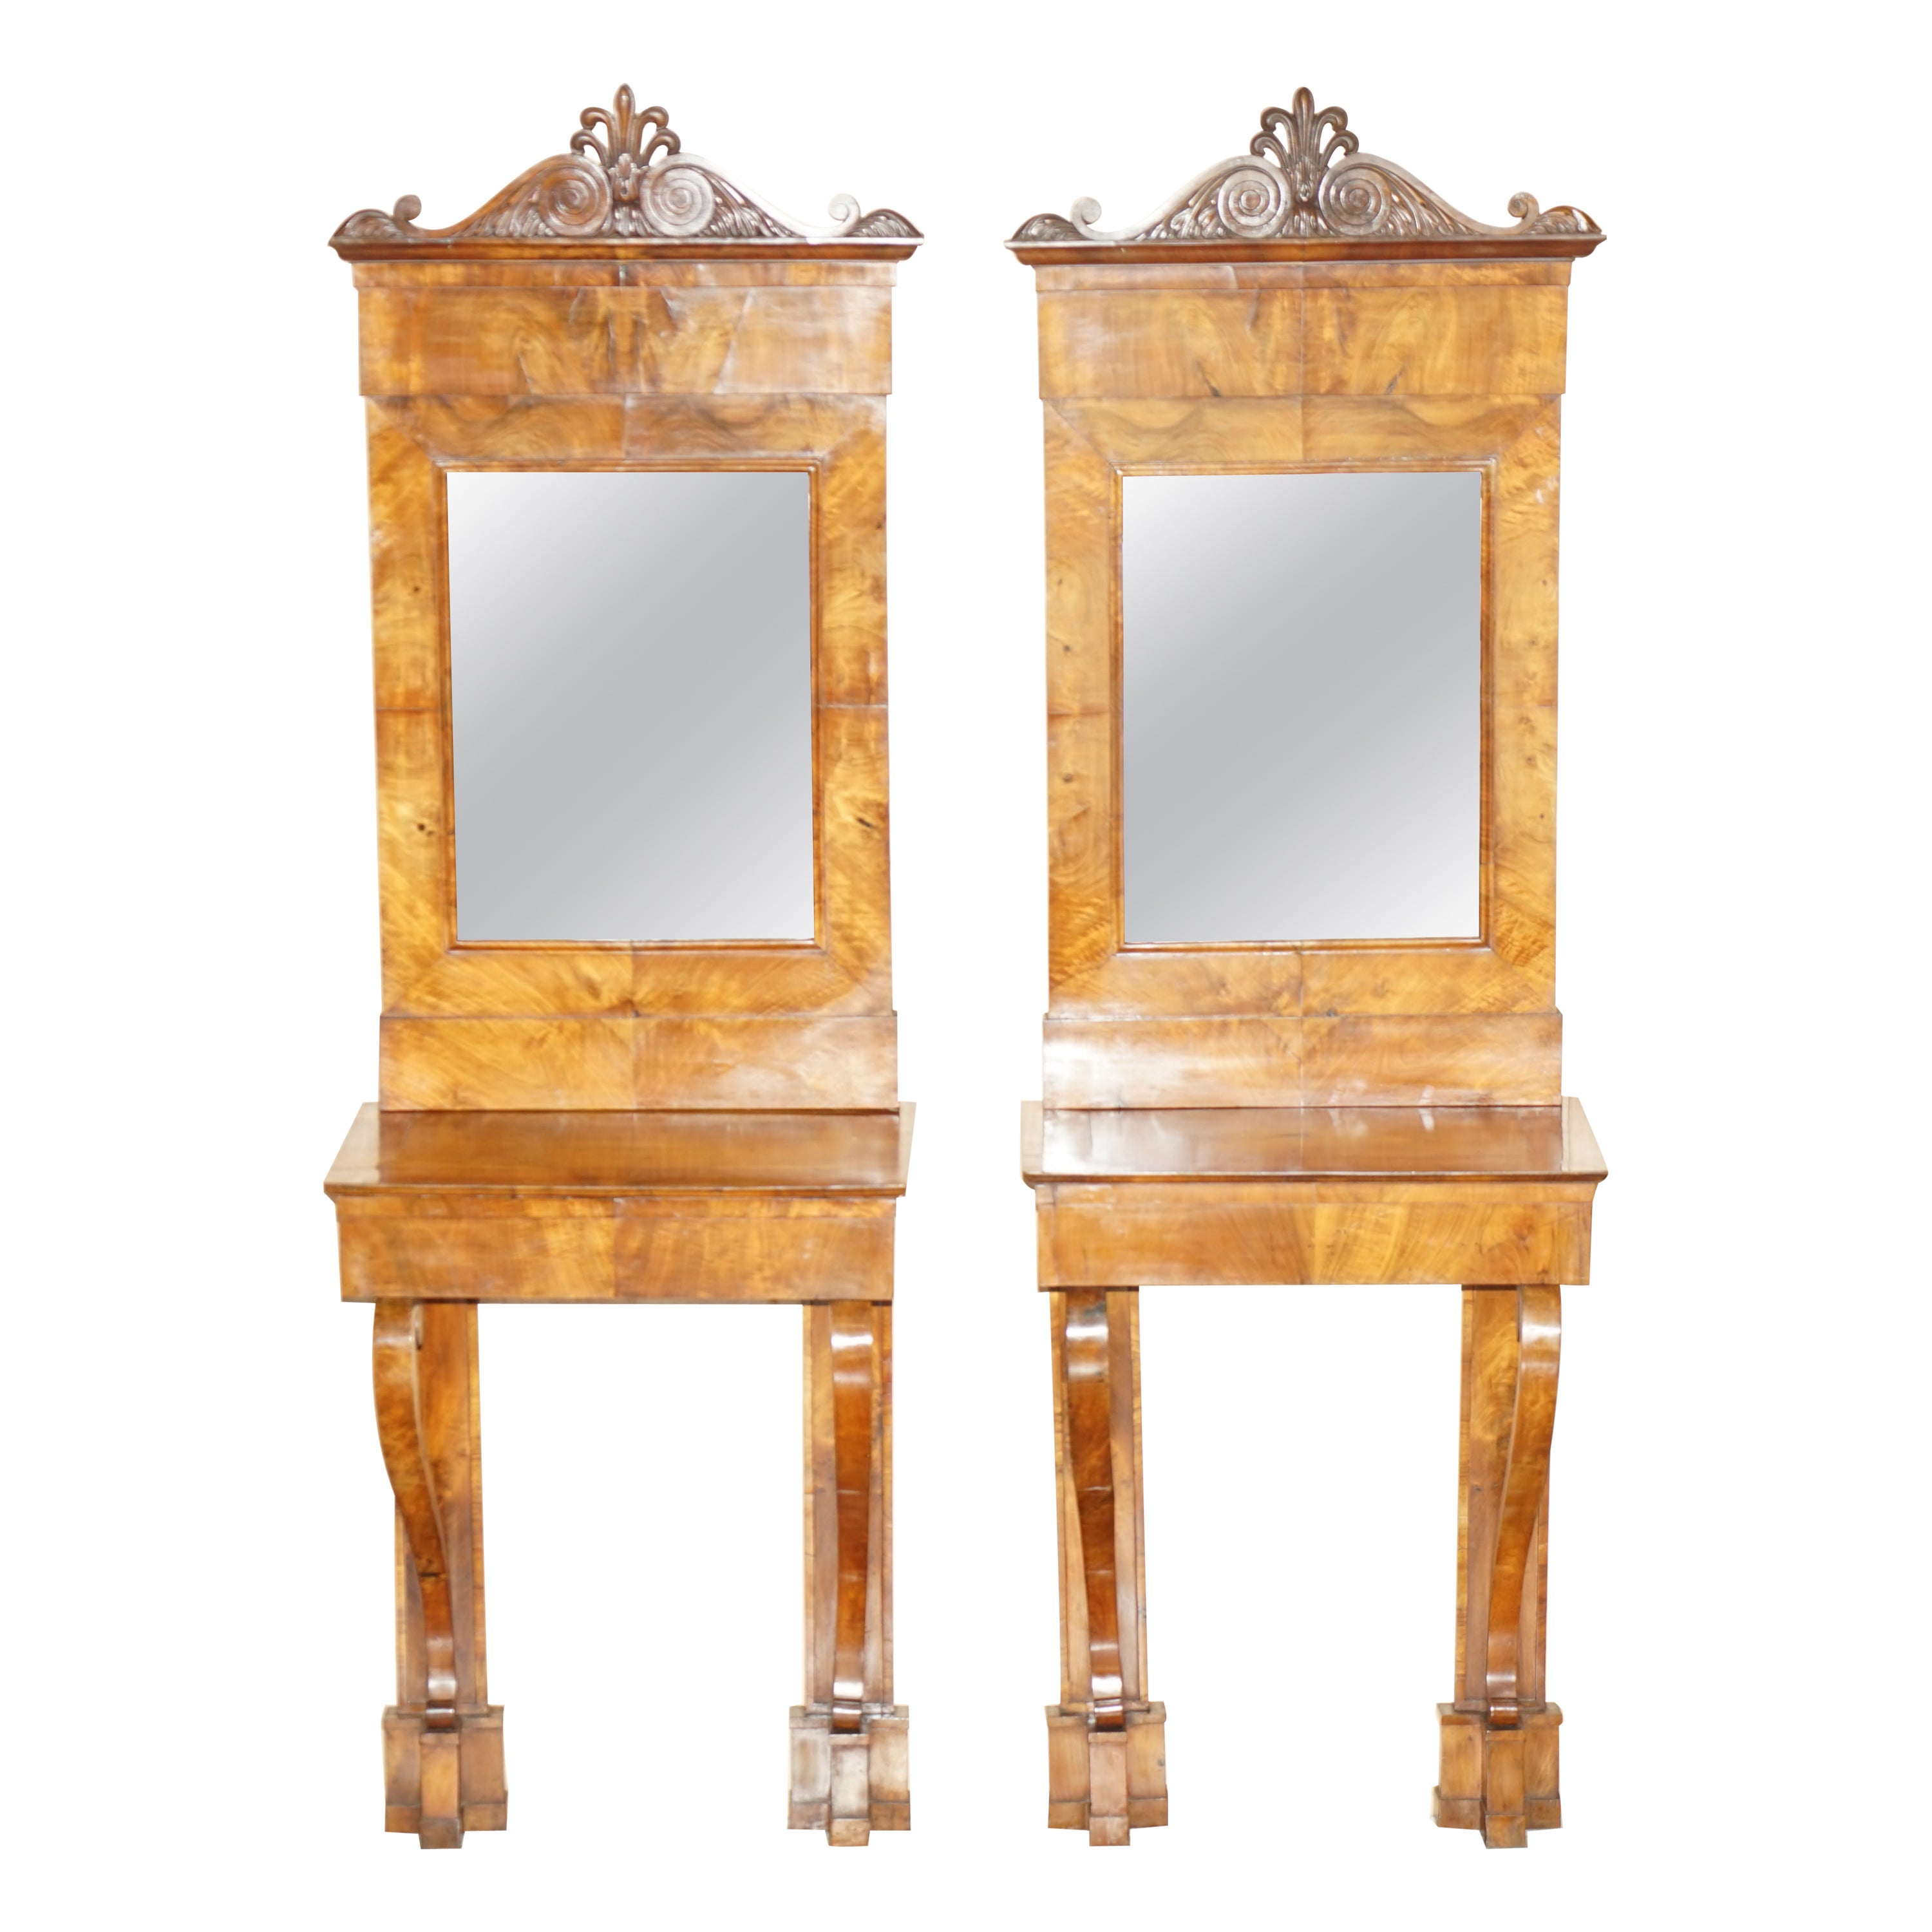 PAIR OF FULLY RESTORED ANTIQUE CiRCA 1815 REGENCY WALNUT CONSOLE TABLES & MIRROr For Sale